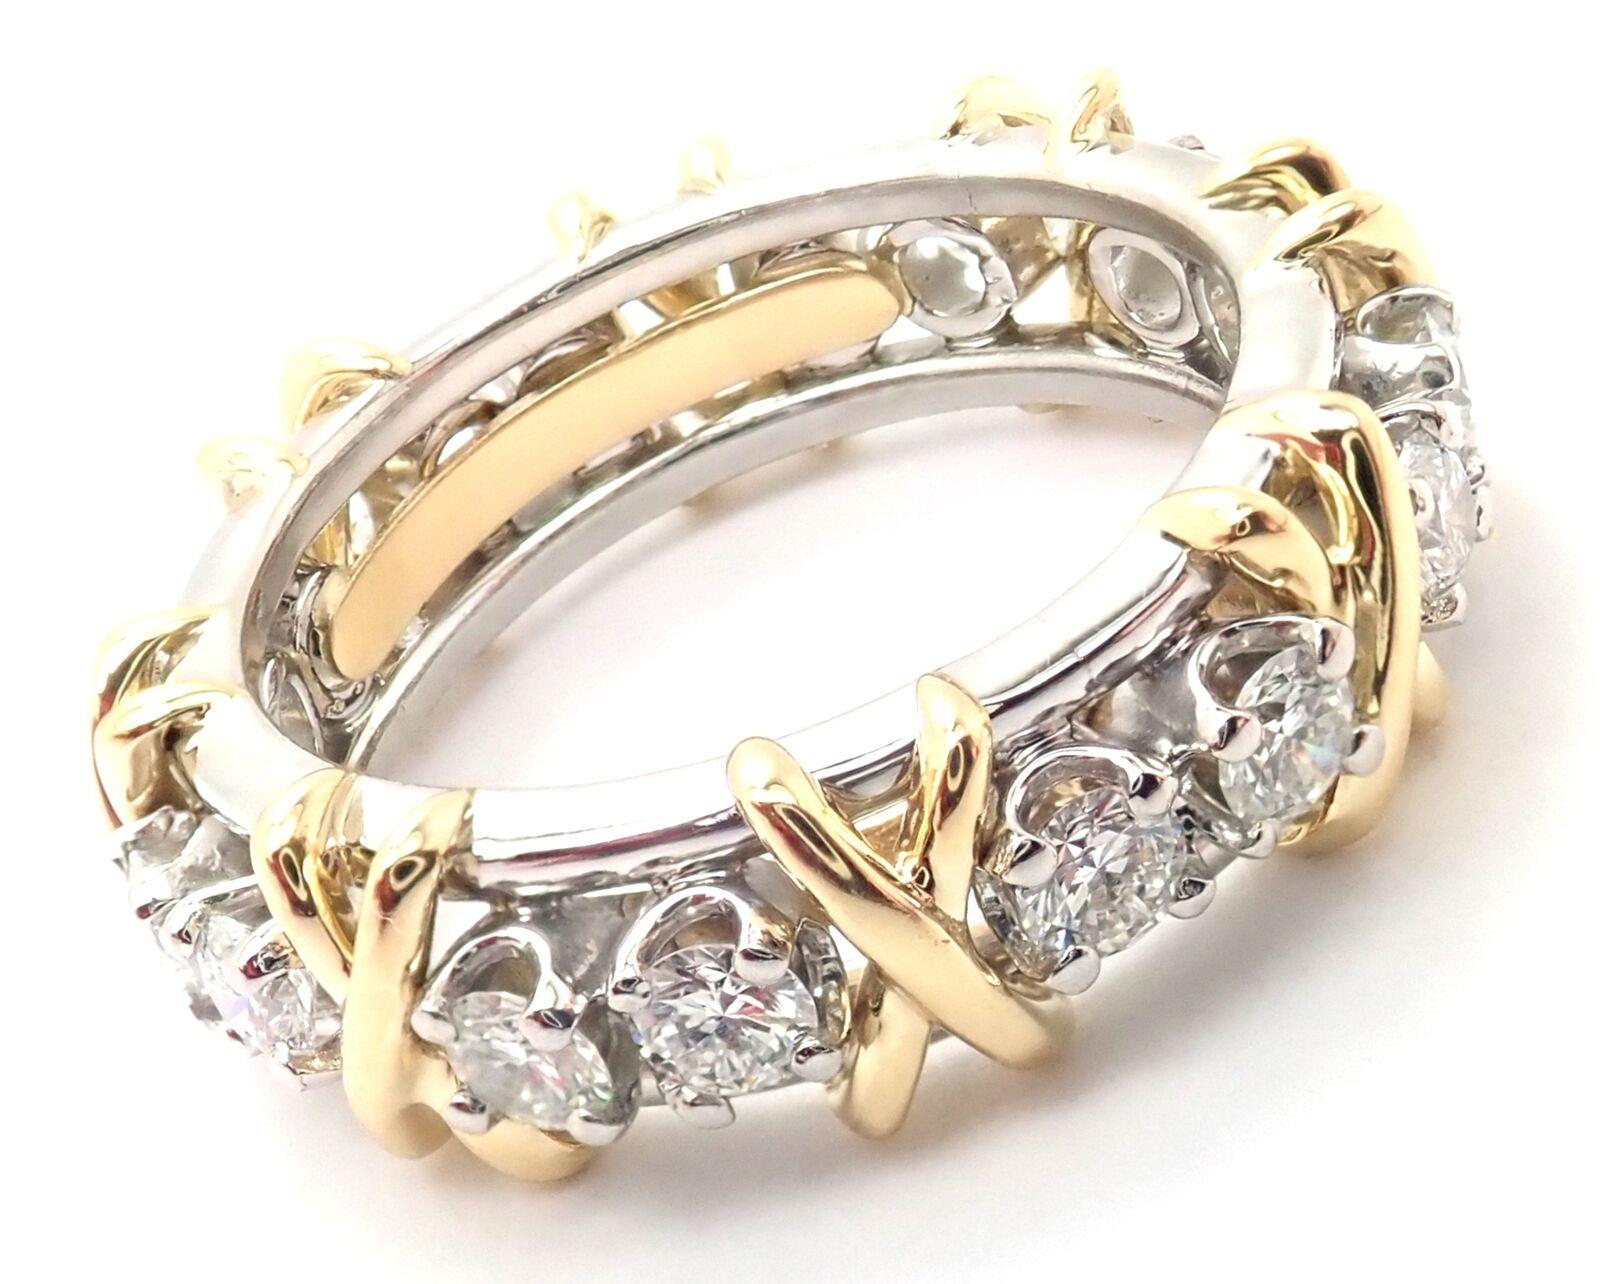 Brilliant Cut Tiffany & Co. Jean Schlumberger Diamond Yellow Gold and Platinum Band Ring